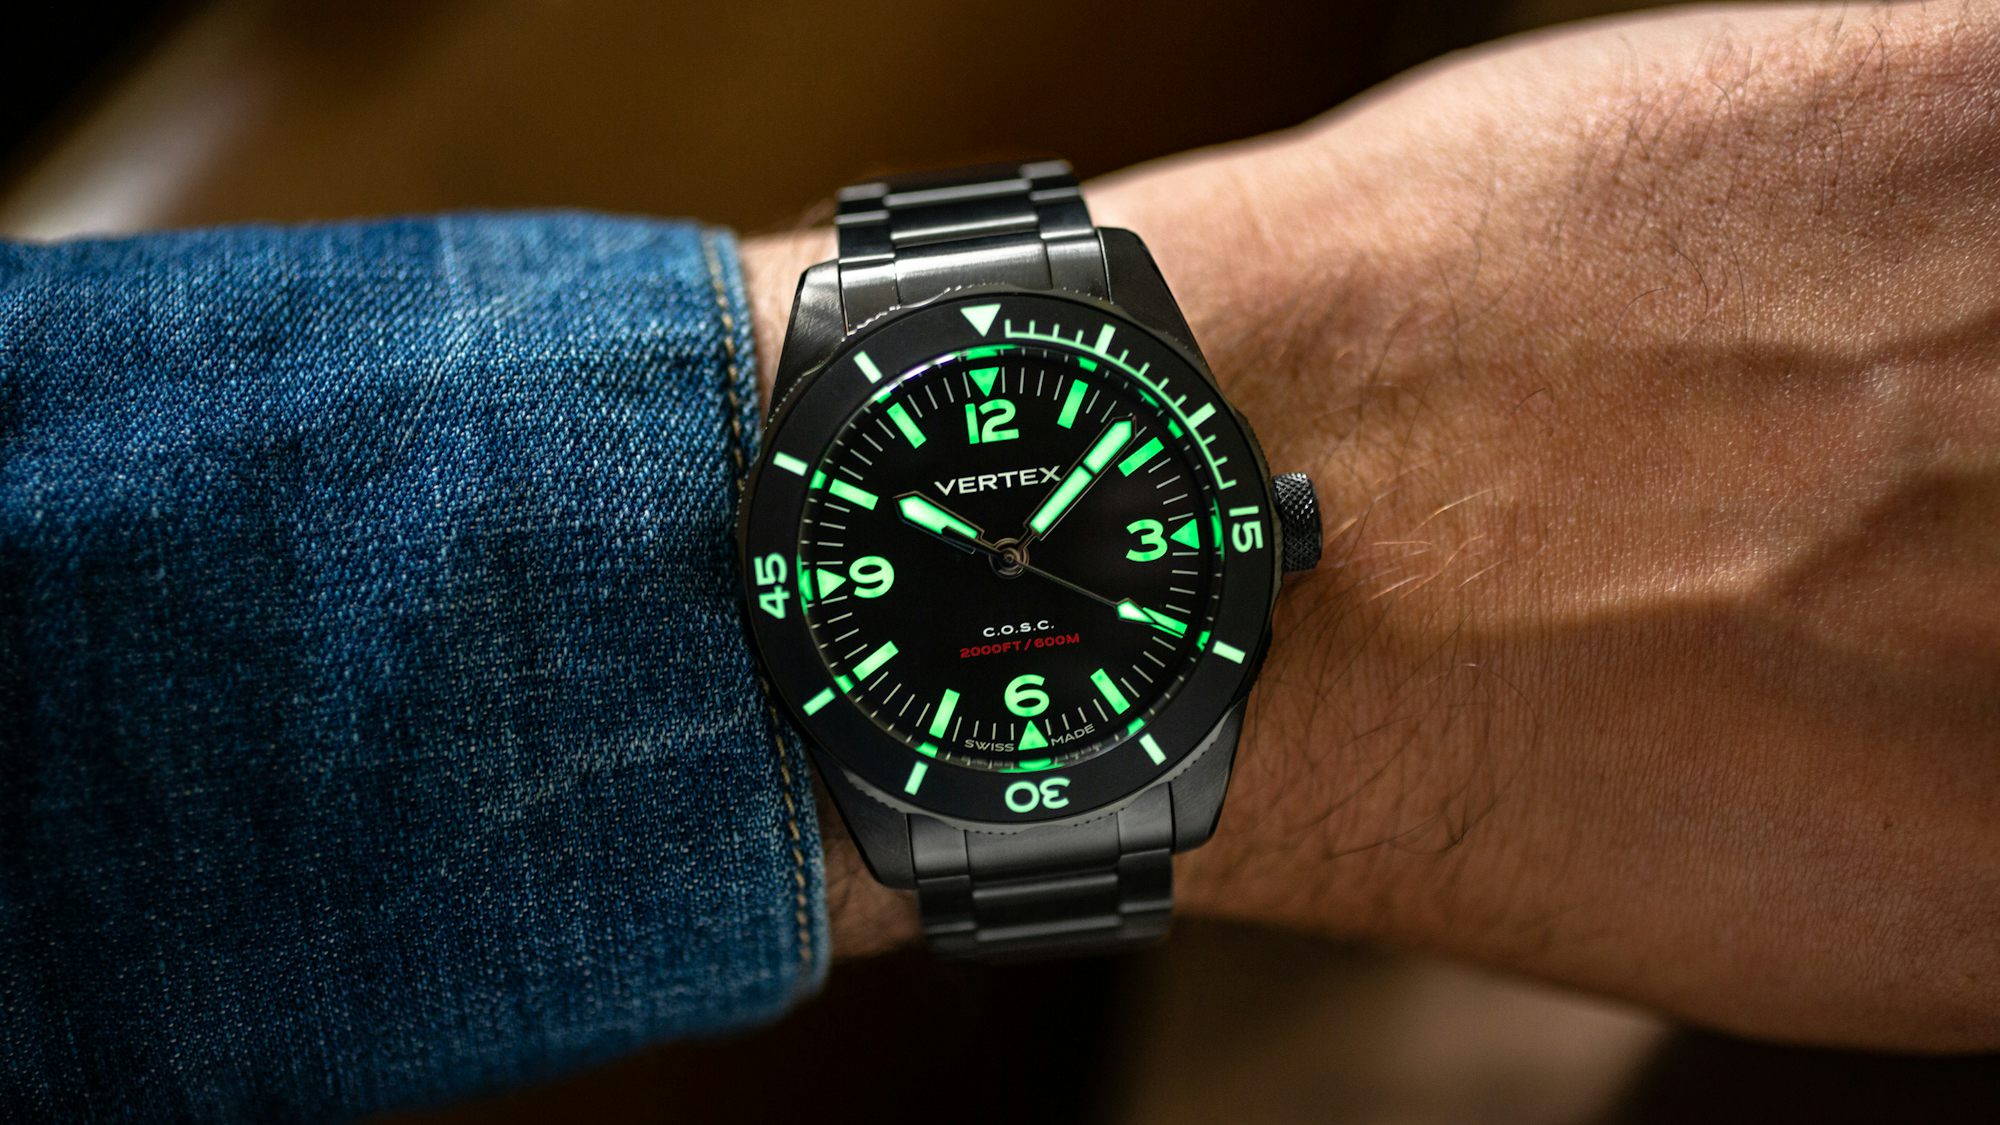 Hands-On: The Vertex AquaLion M60C Pushes The Microbrand Envelope